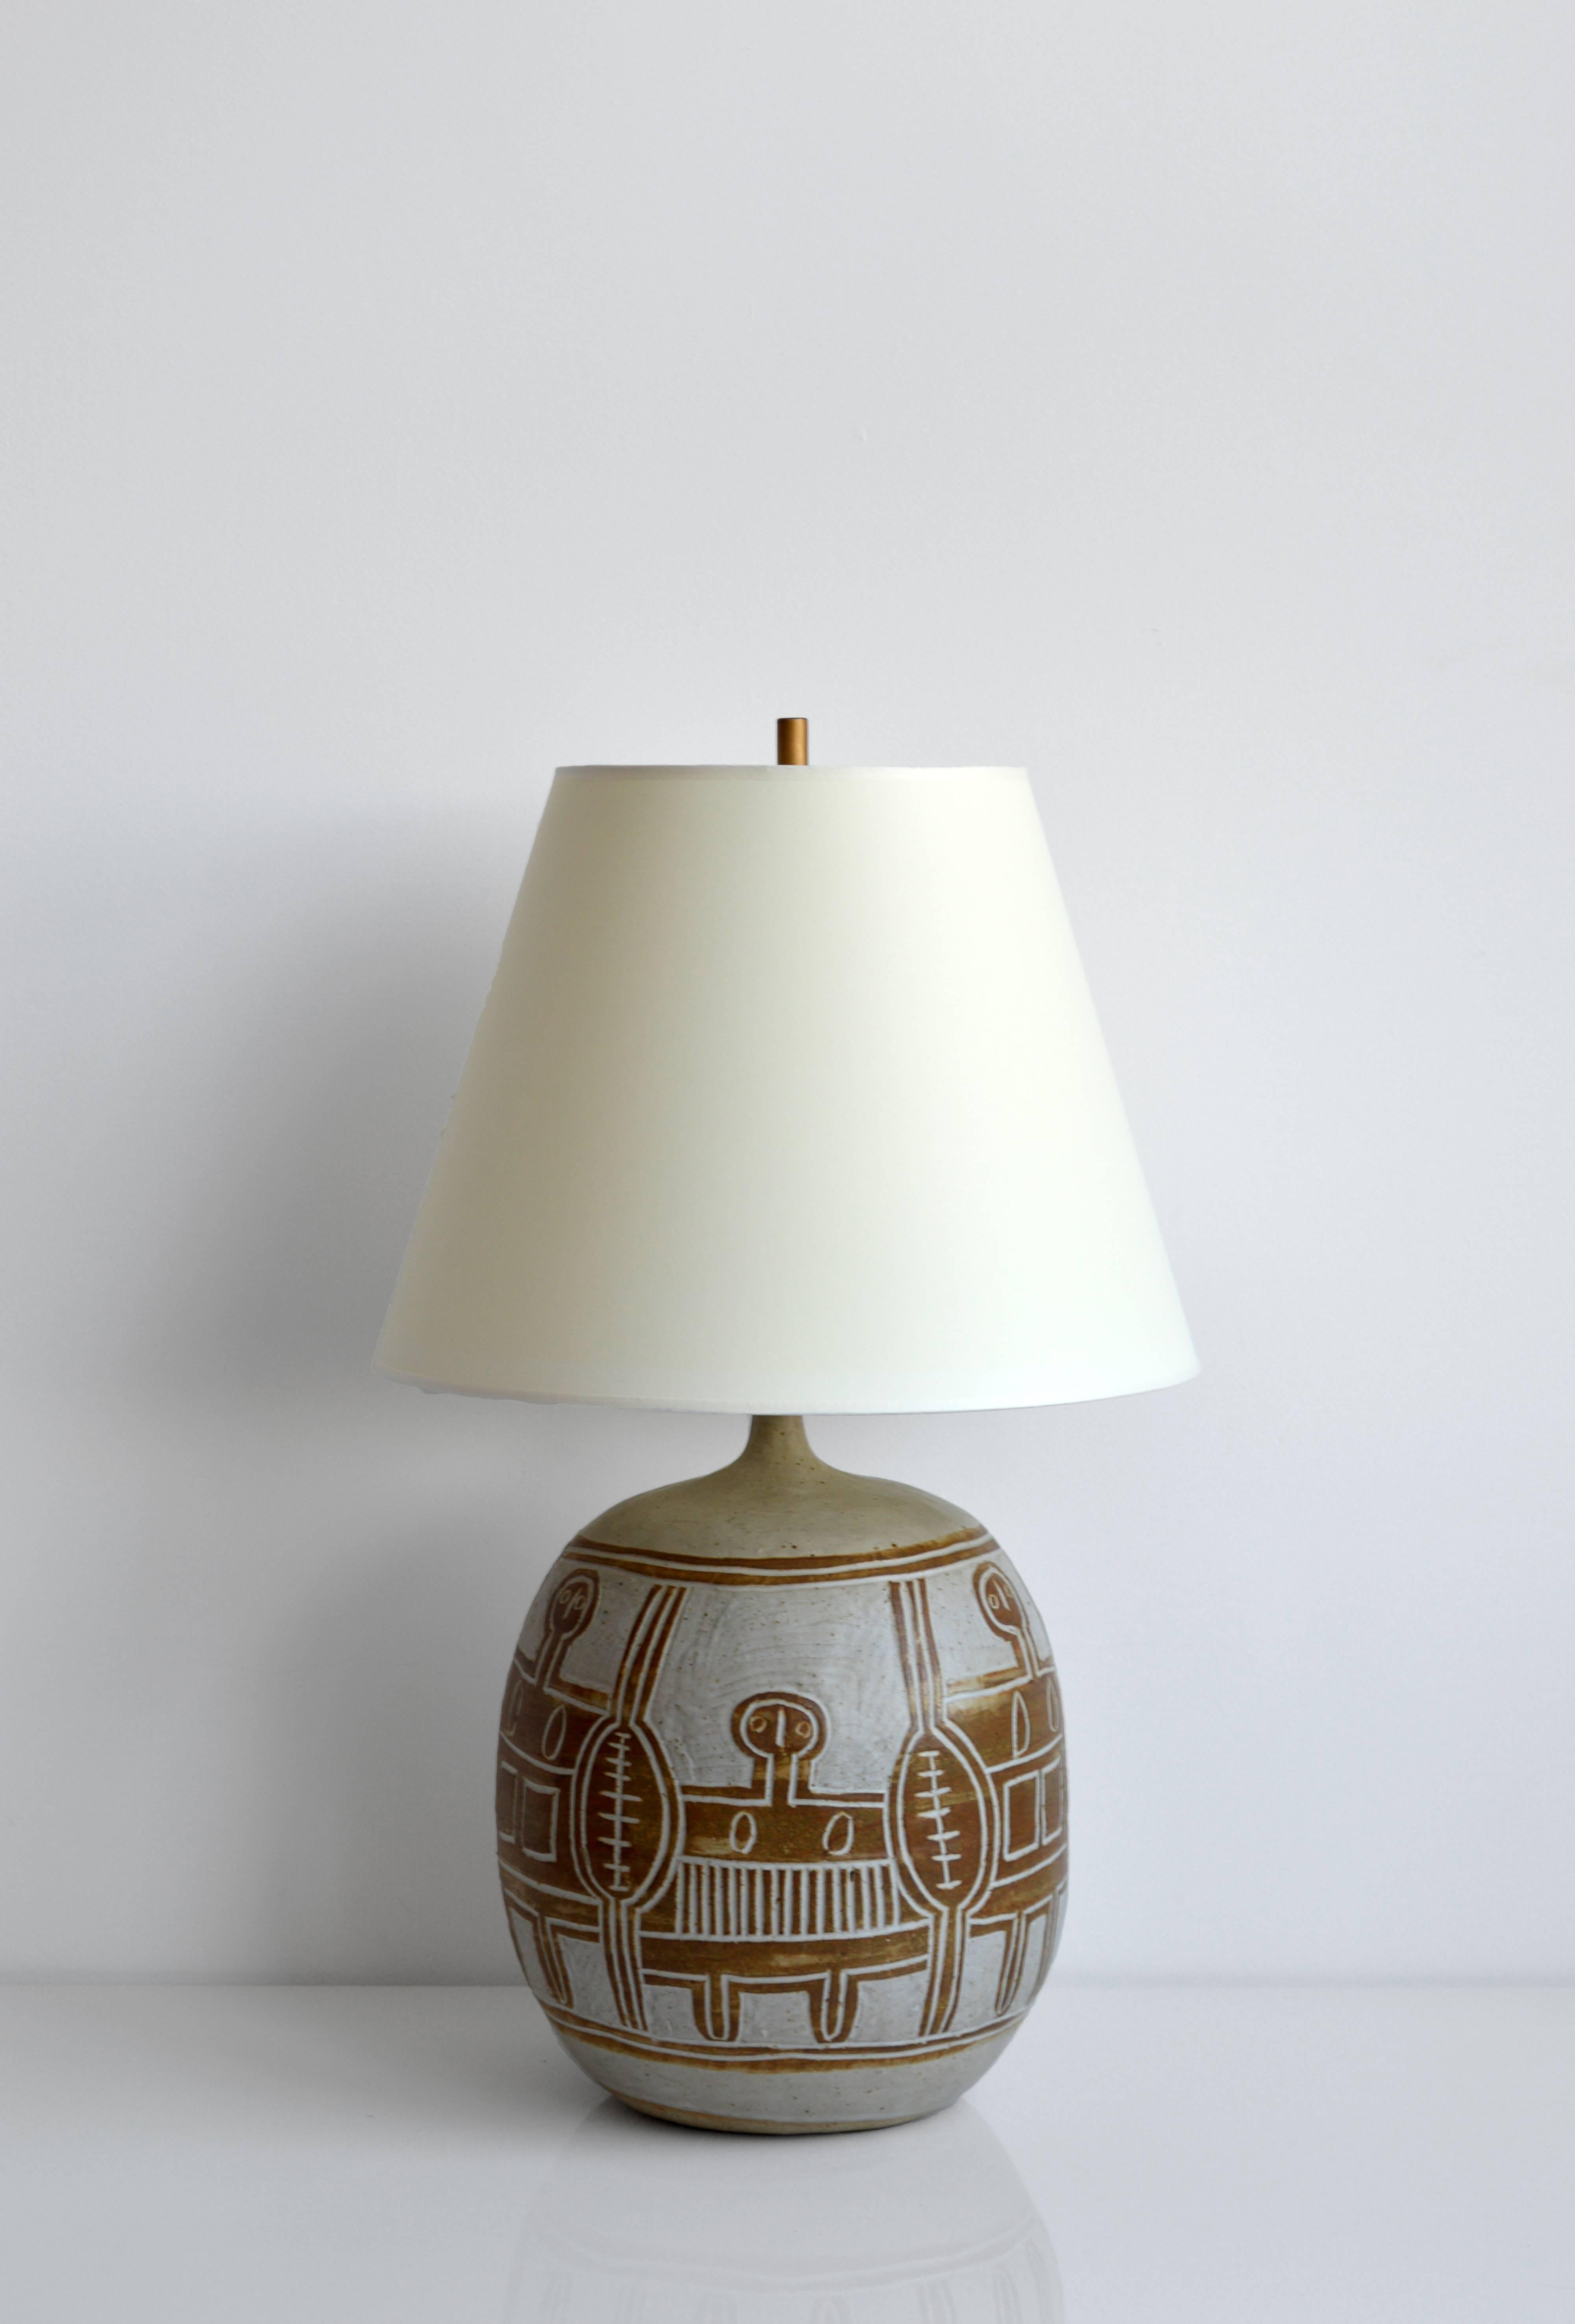 Vintage French ceramic table lamp. Carved figural artwork surrounds the base. This lamp has been rewired for US use with a brown silk cord. Wonderful for any bedside table or case piece.

New paper shade included.

Offered by Neal Beckstedt